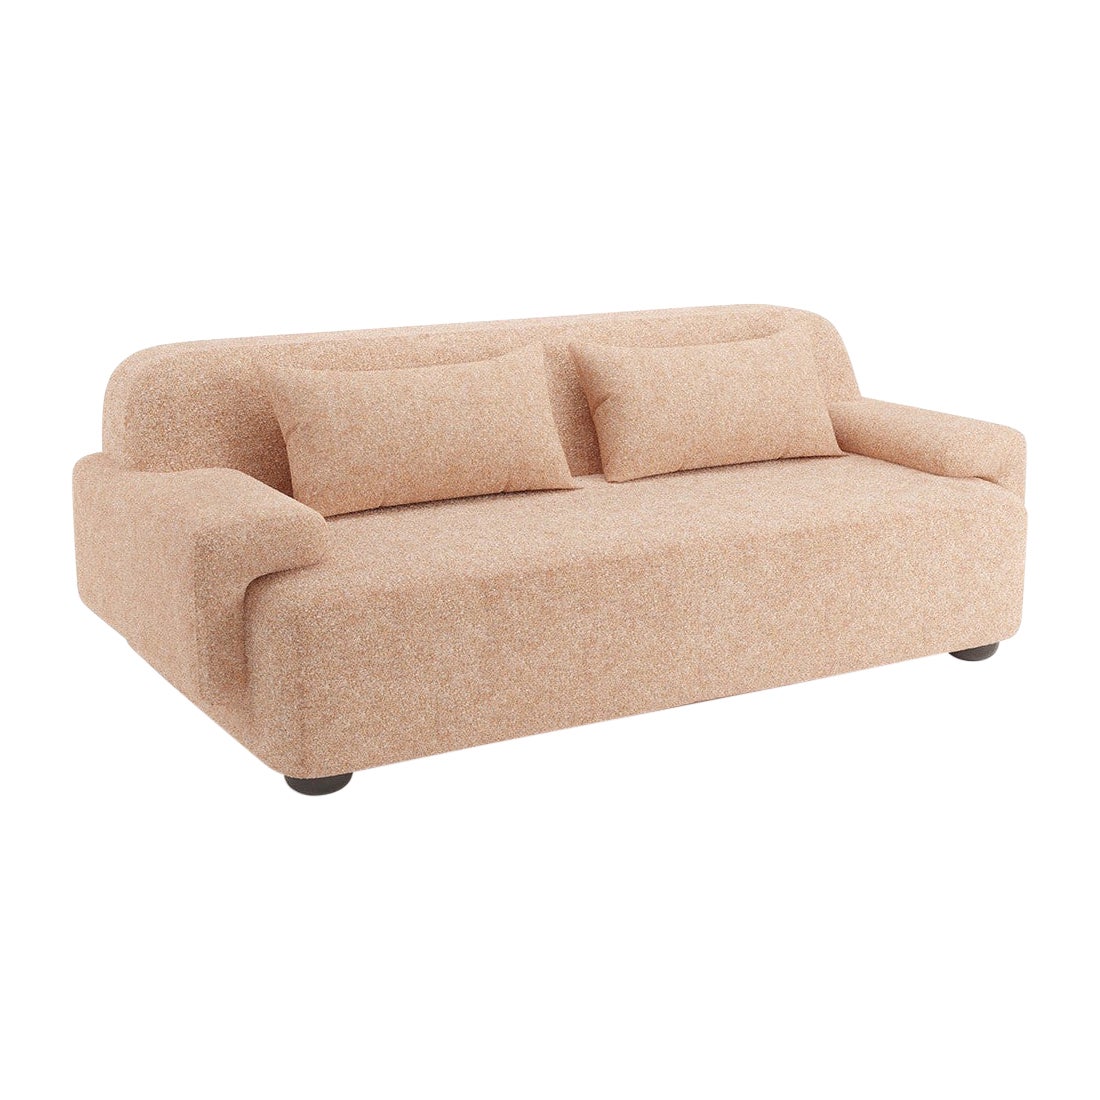 Popus Editions Lena 3 Seater Sofa in Nude Antwerp Linen Upholstery